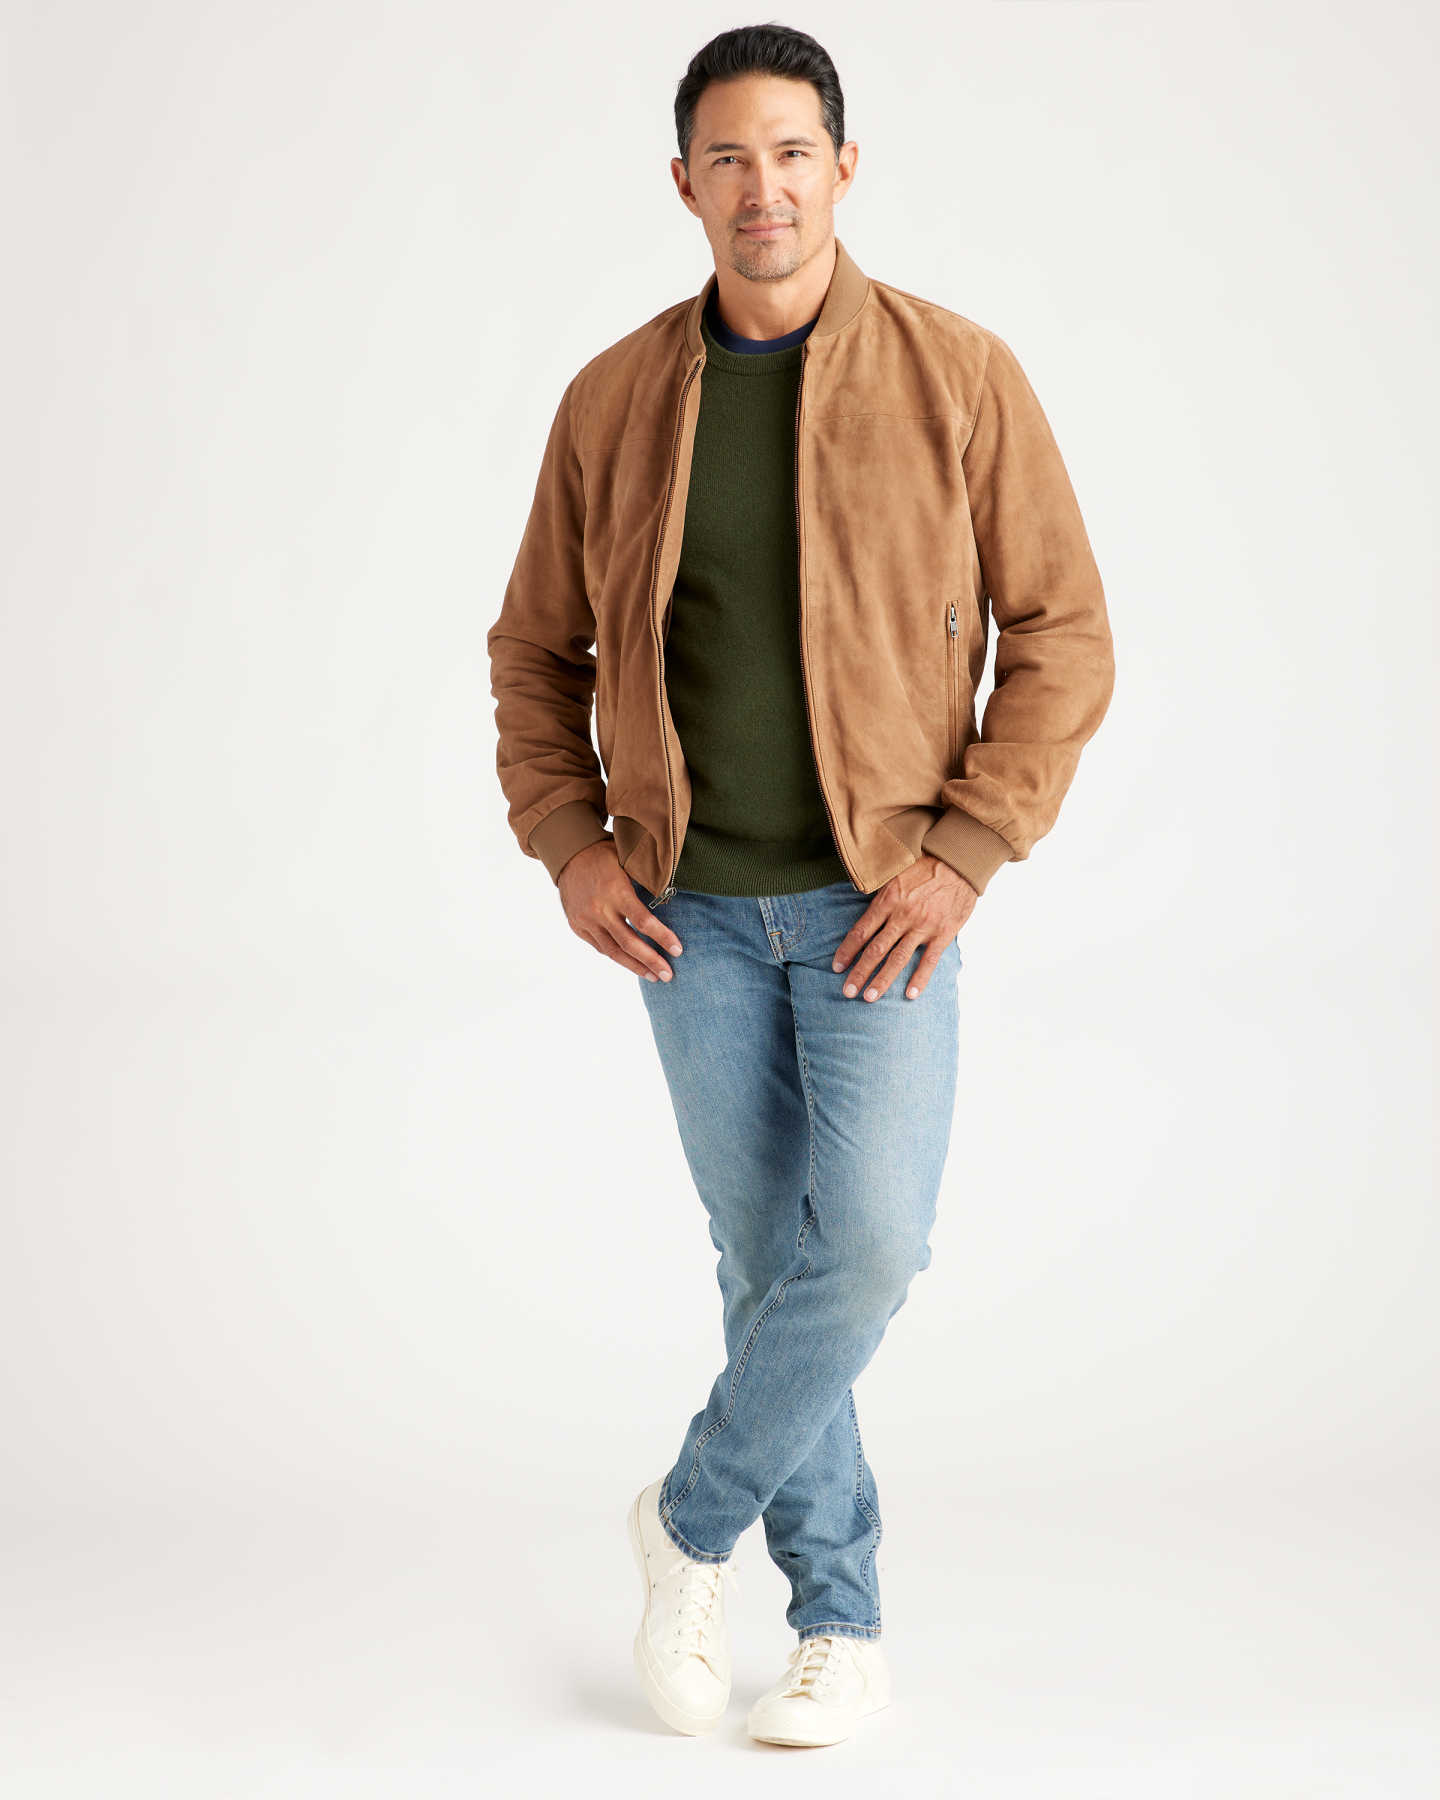 You May Also Like - 100% Suede Bomber Jacket - Cognac